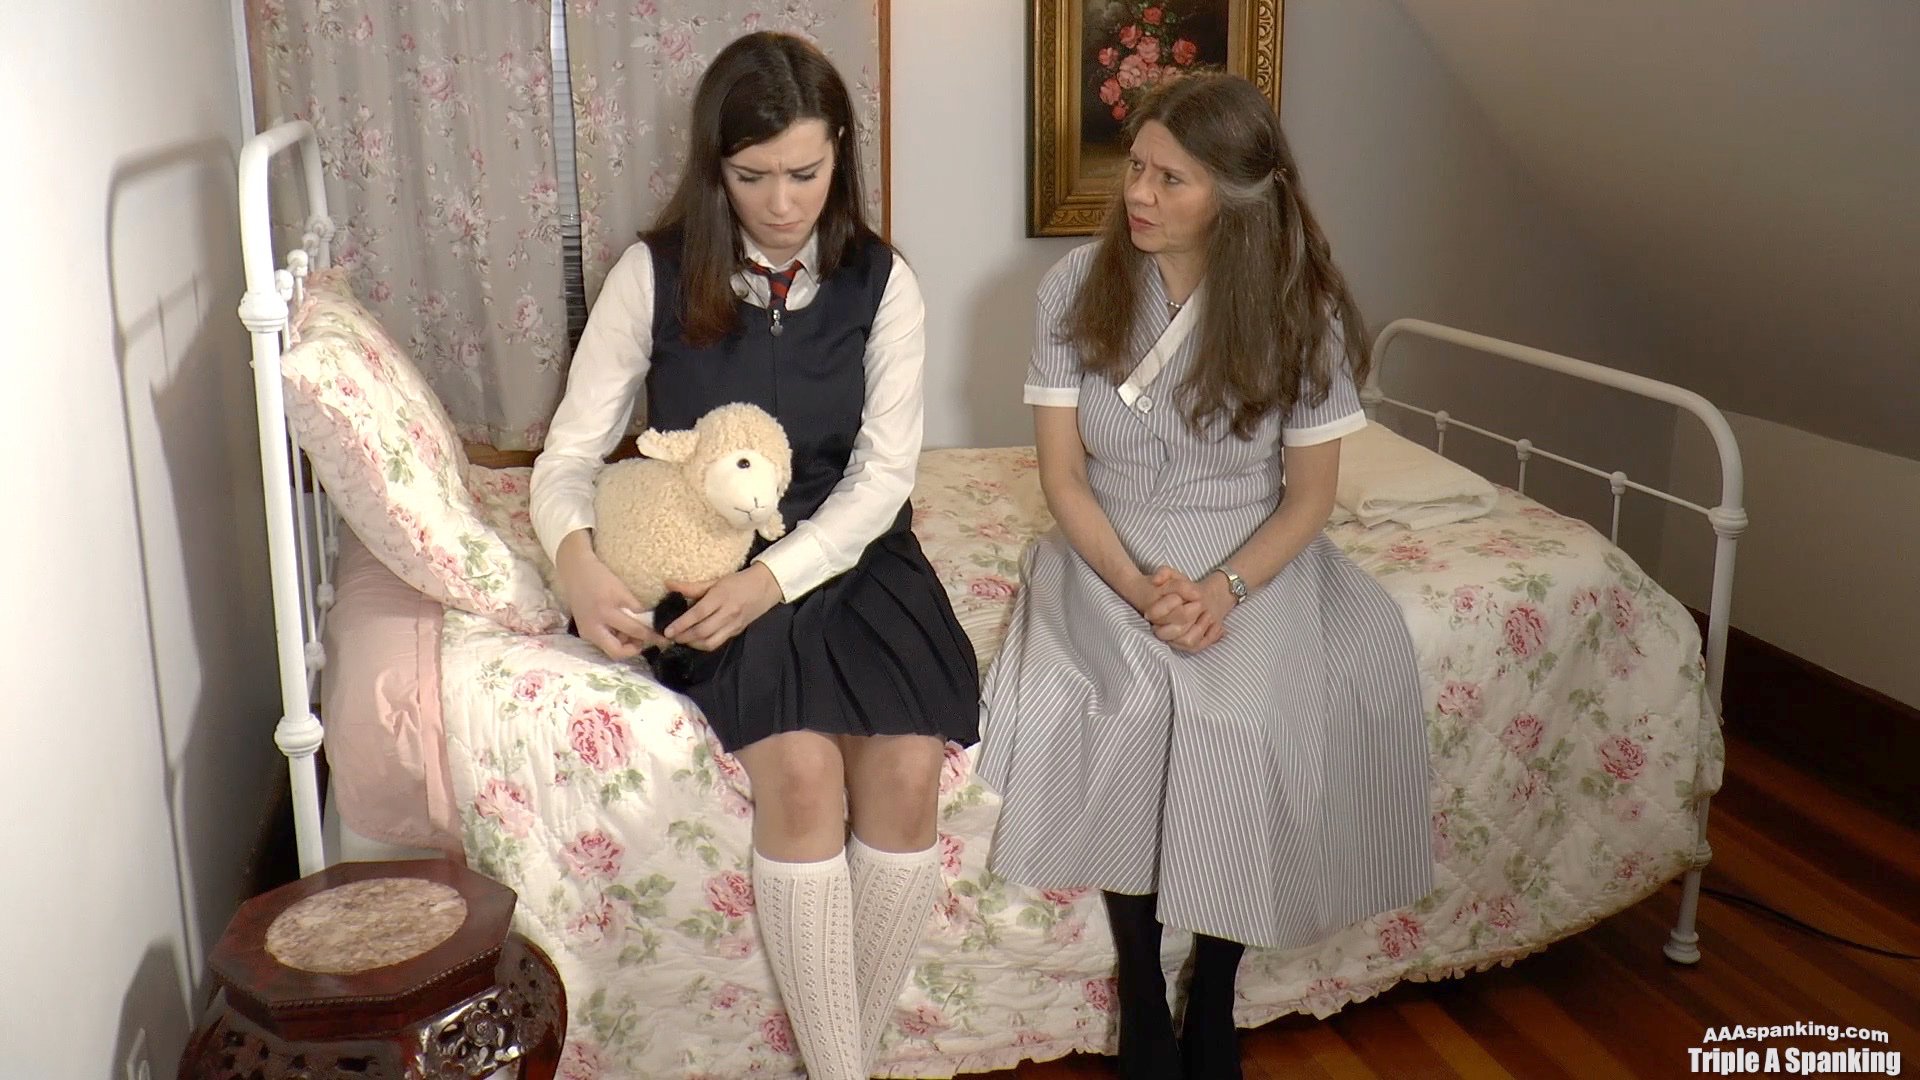 â€œJust edited this fabulous film introducing new #spanking model from the #a...